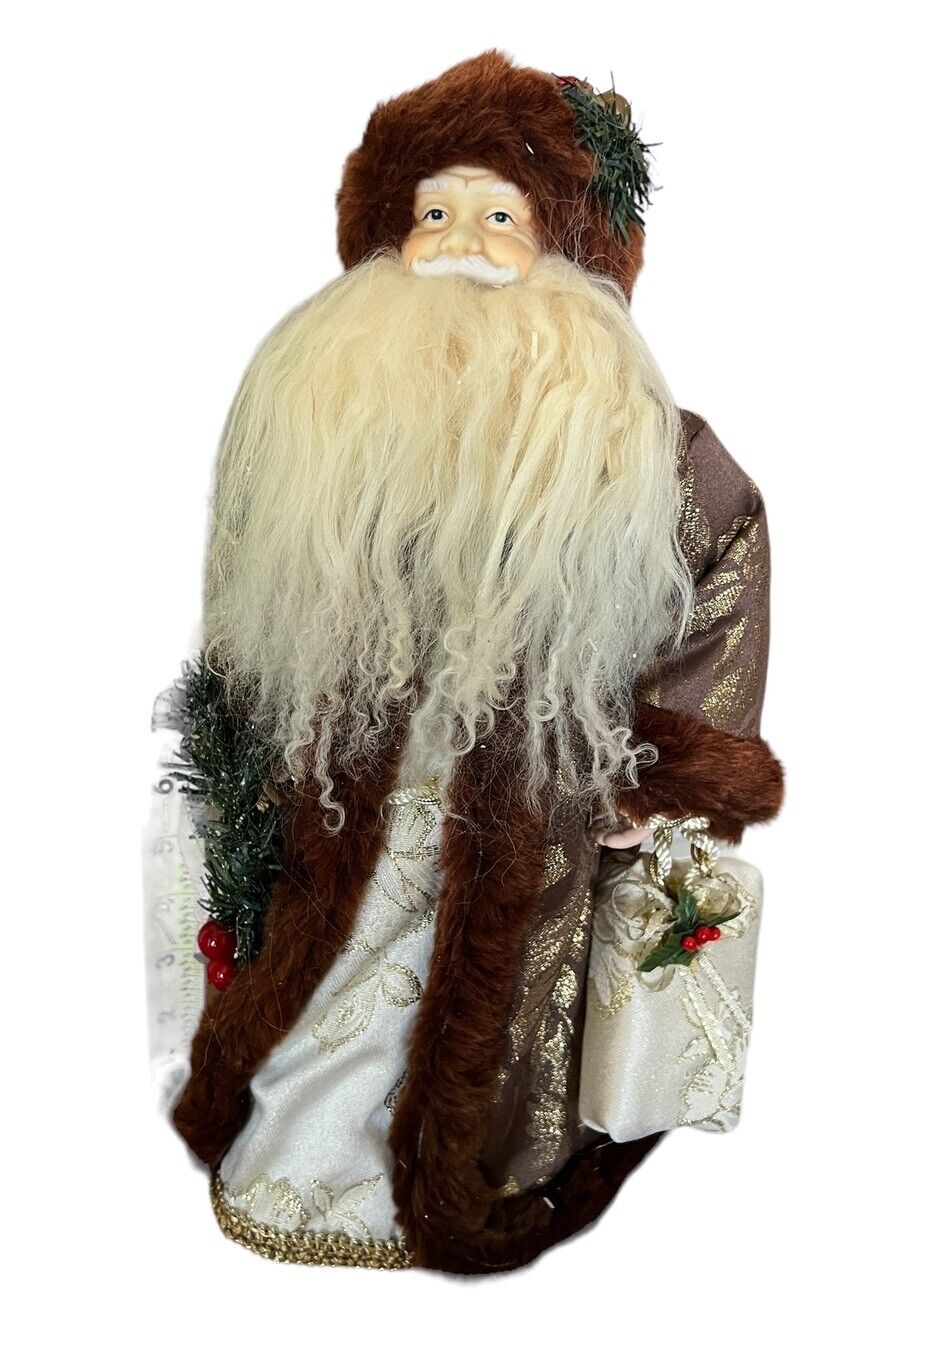 15 Inch Tall Santa Claus Decoration Figure Christmas With Wreath And Presents